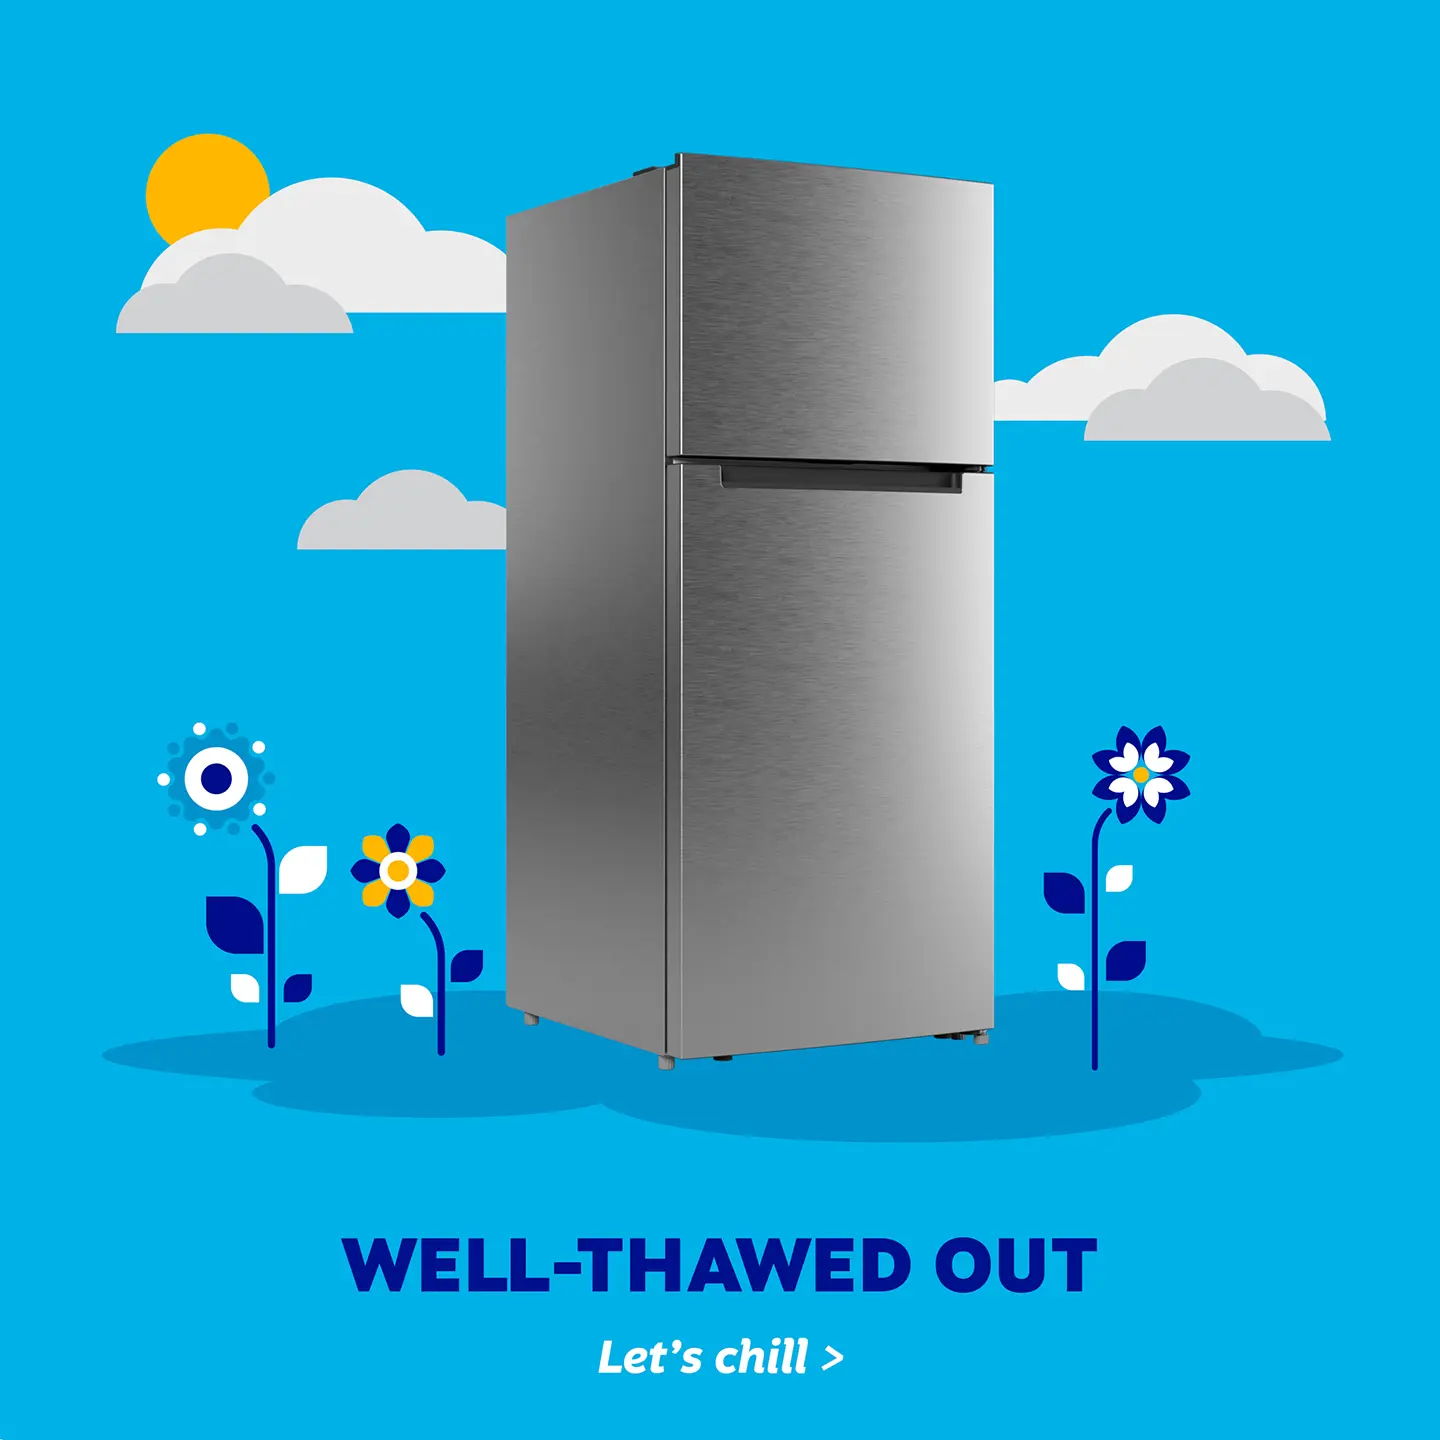 Well-thawed out - let's chill with an Element refrigerator